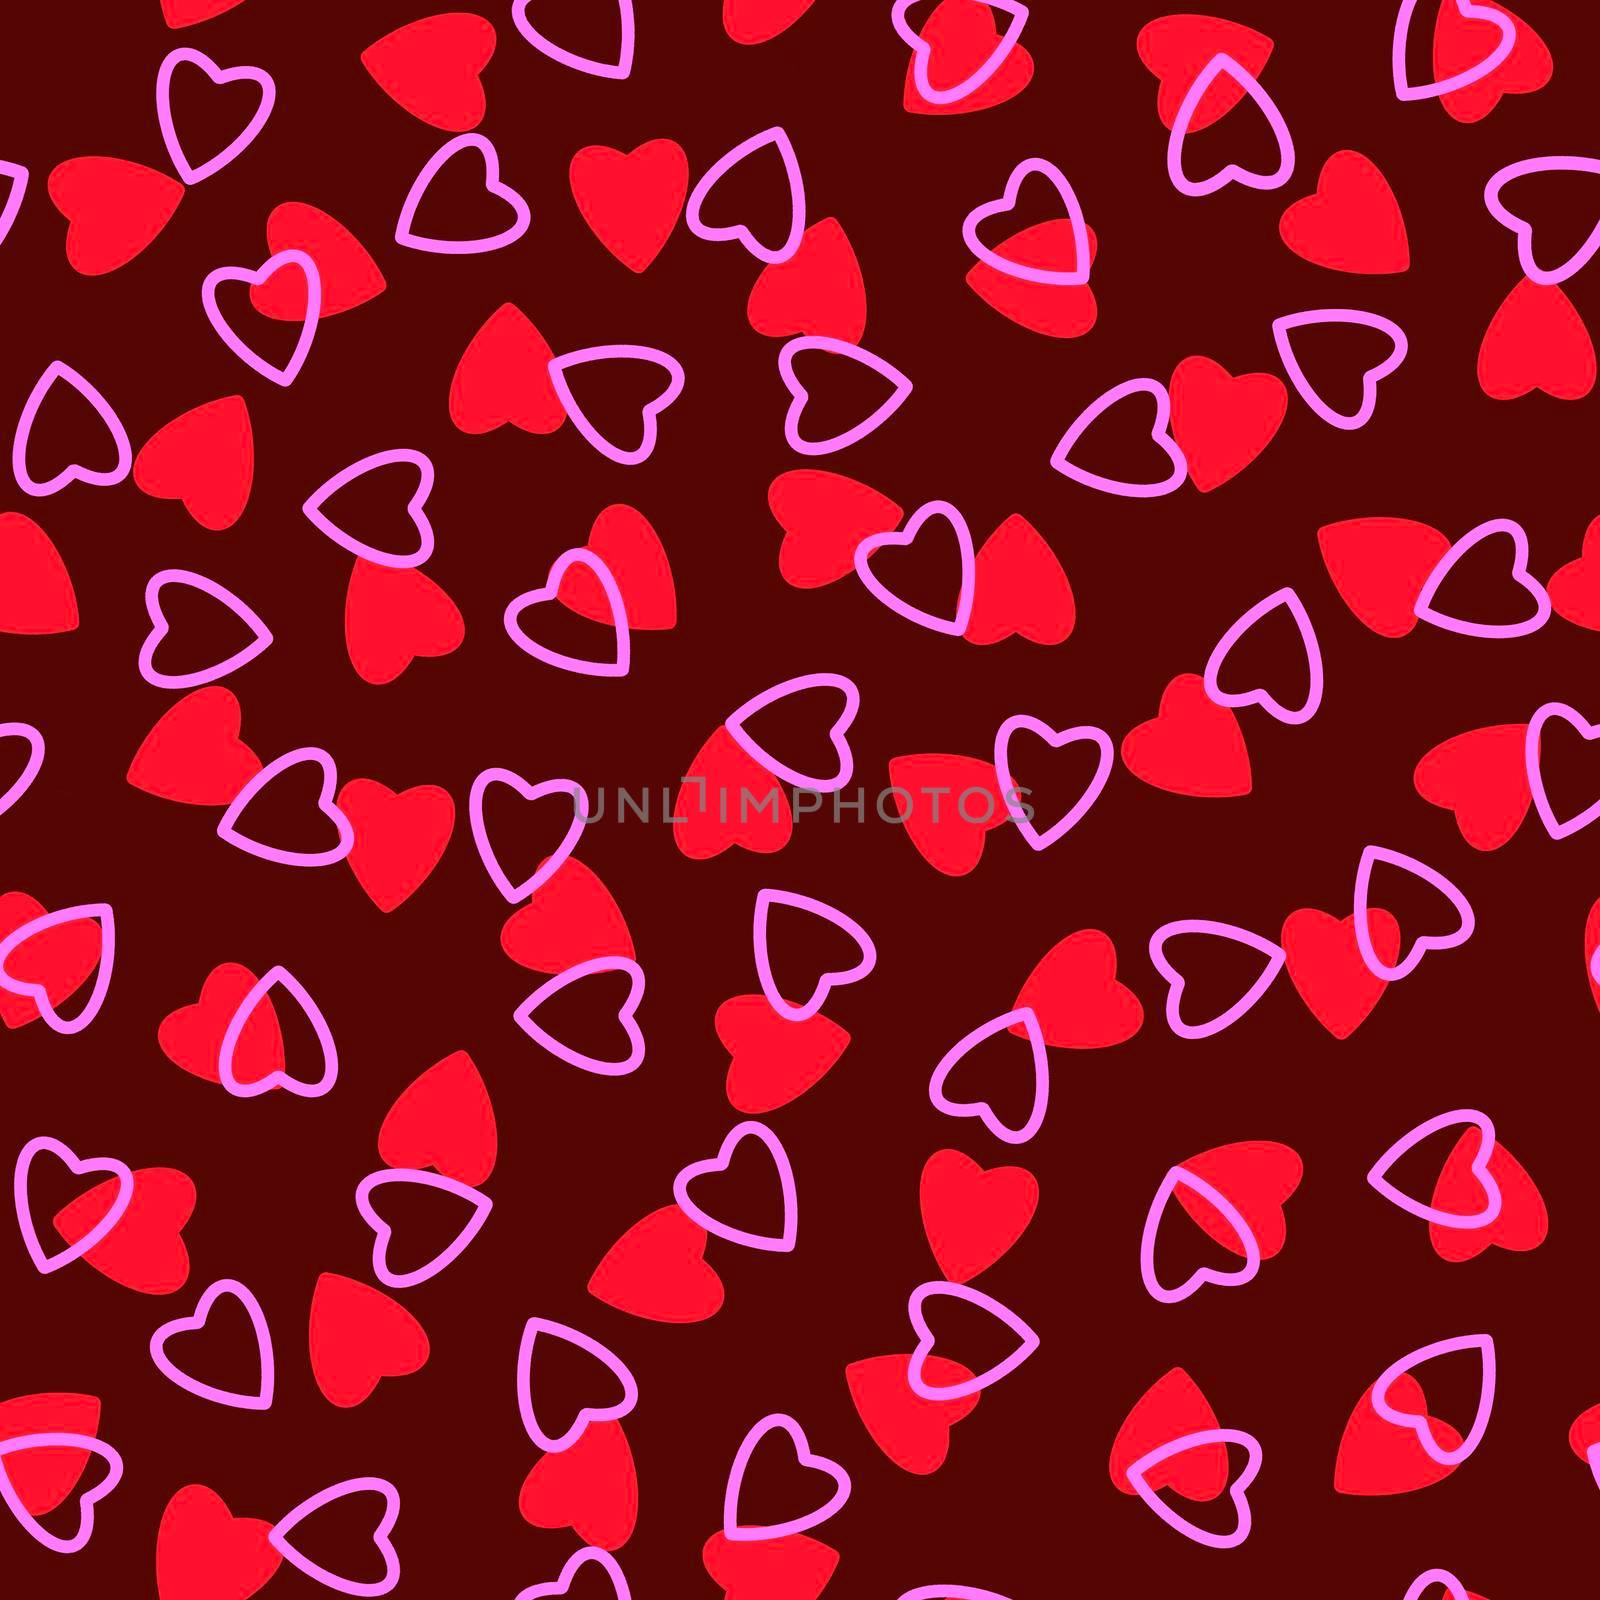 Simple heart seamless pattern,endless chaotic texture made of tiny heart silhouettes.Valentines,mothers day background.Red,pink,burgundy.Great for Easter,wedding,scrapbook,gift wrapping paper,textiles